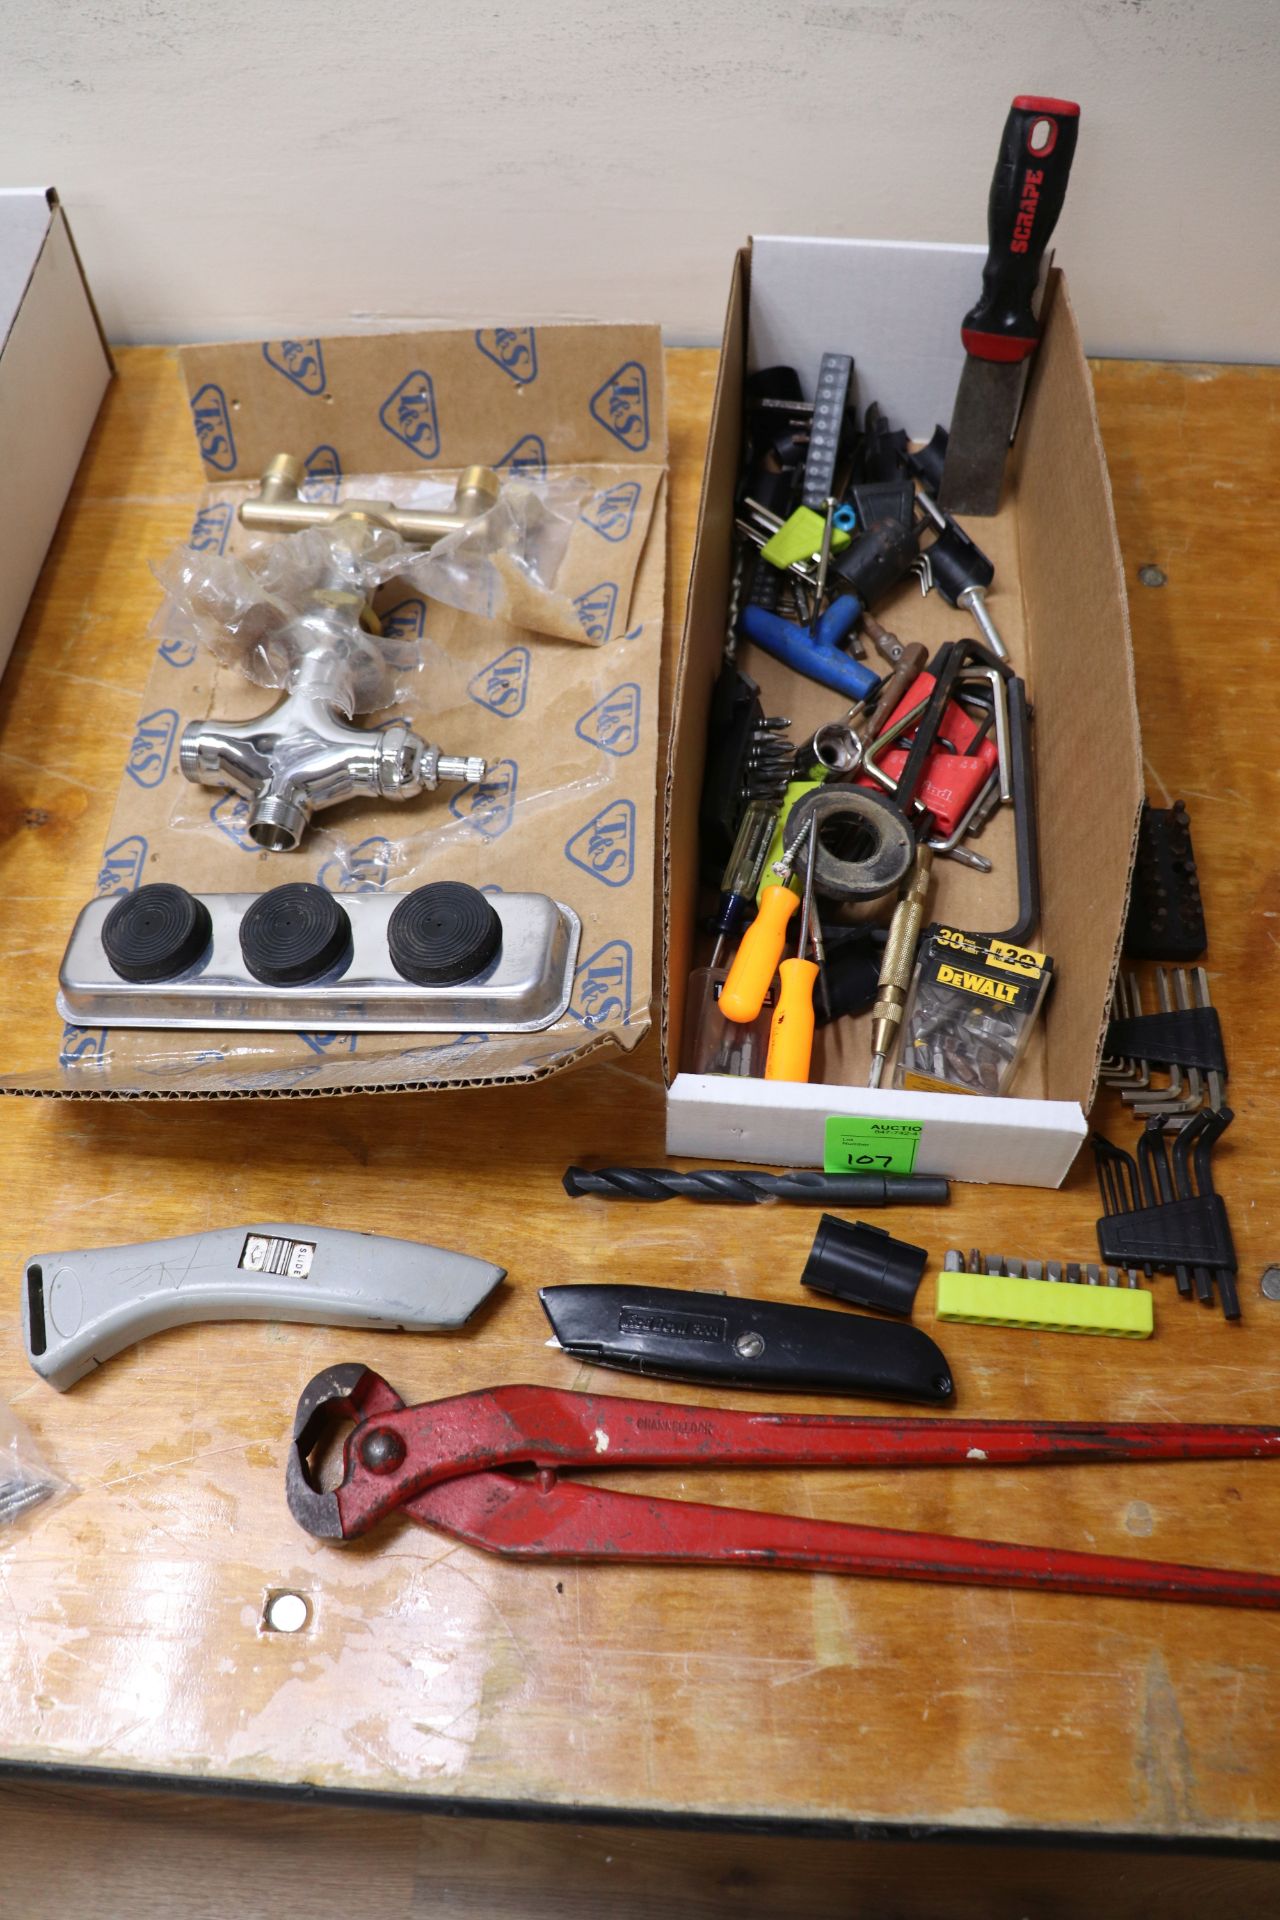 Miscellaneous hand tools and driver bits